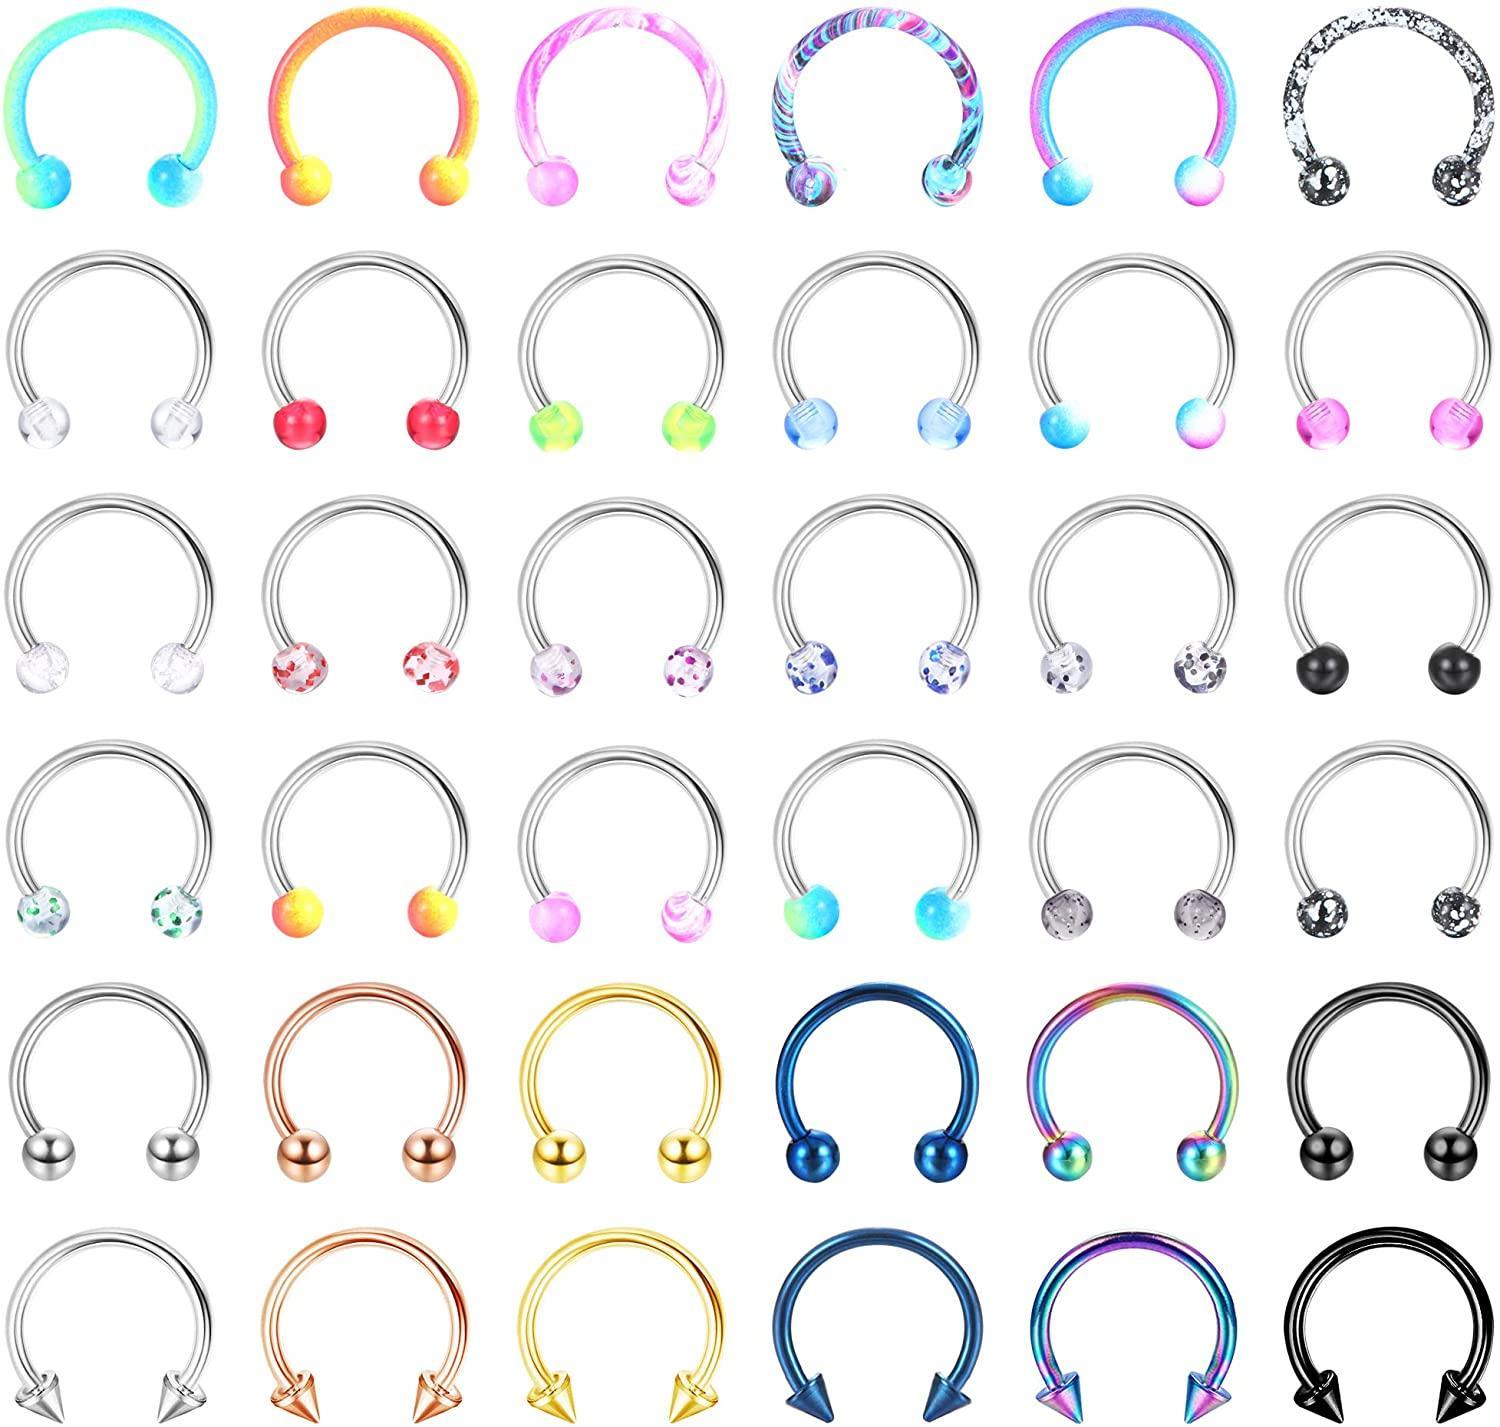 Collection of colorful Horseshoe Septum Rings 16G 316L Stainless Steel Cartilage Helix Tragus Earring Nose Hoop Horseshoe Piercing Jewelry for Women Men in various colors and designs, neatly arranged in rows on a white background.